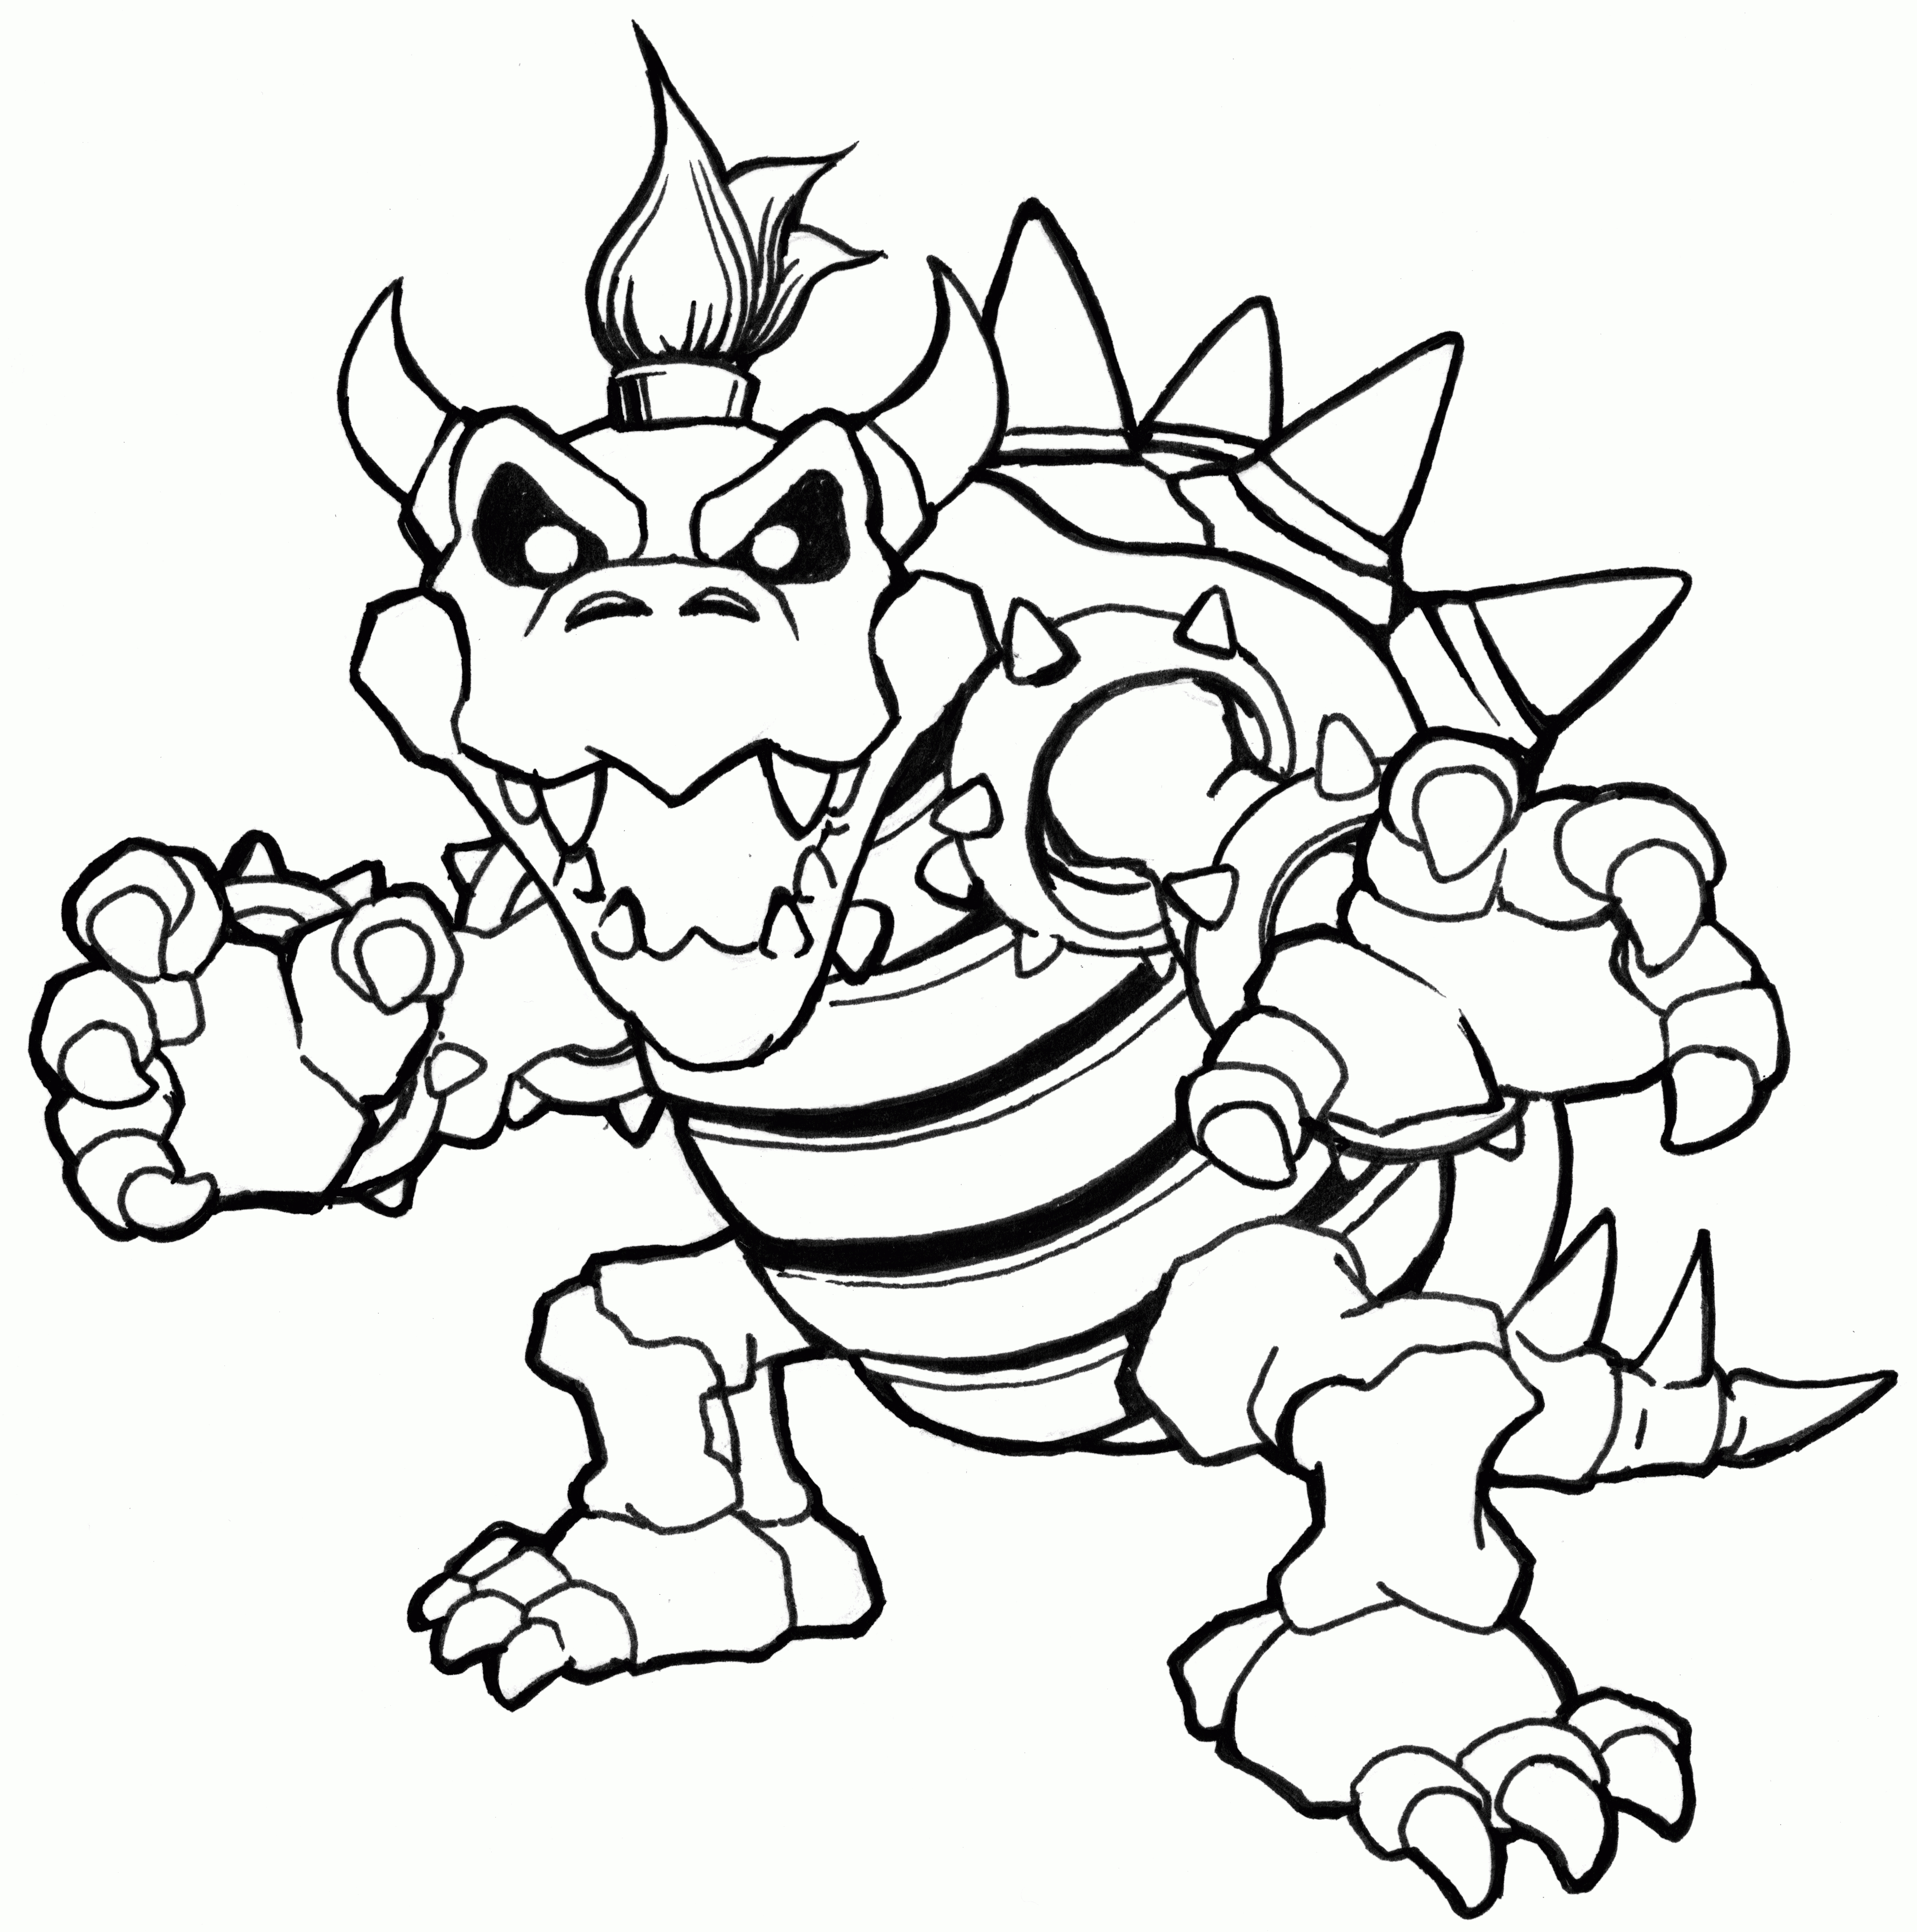 bowser-jr-coloring-pages-printable-high-quality-coloring-pages